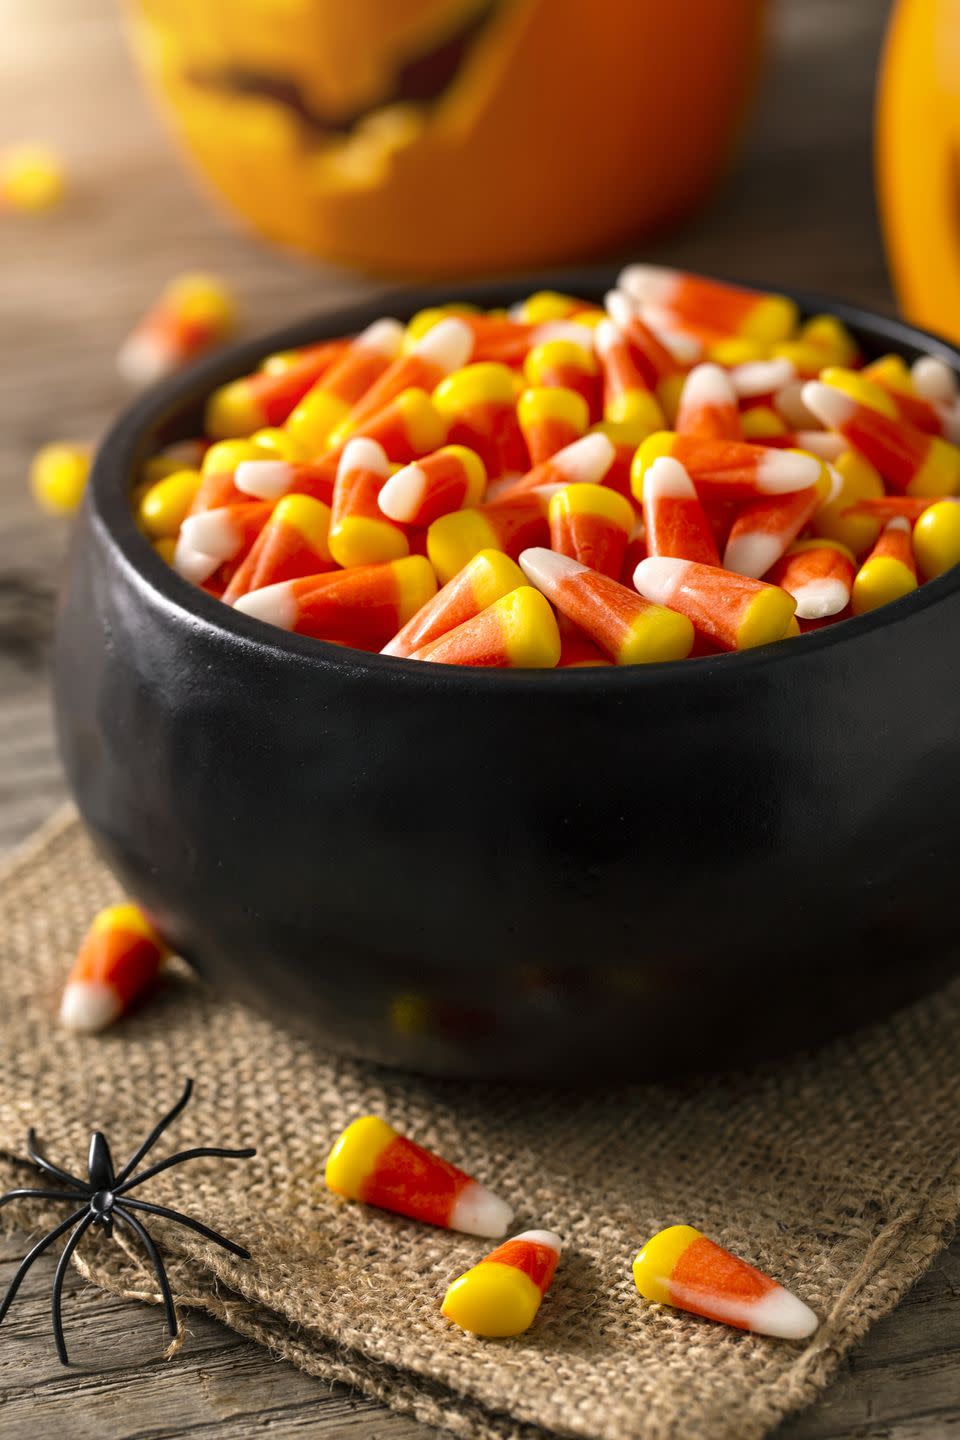 38) Fill Cauldrons with Candy Corn